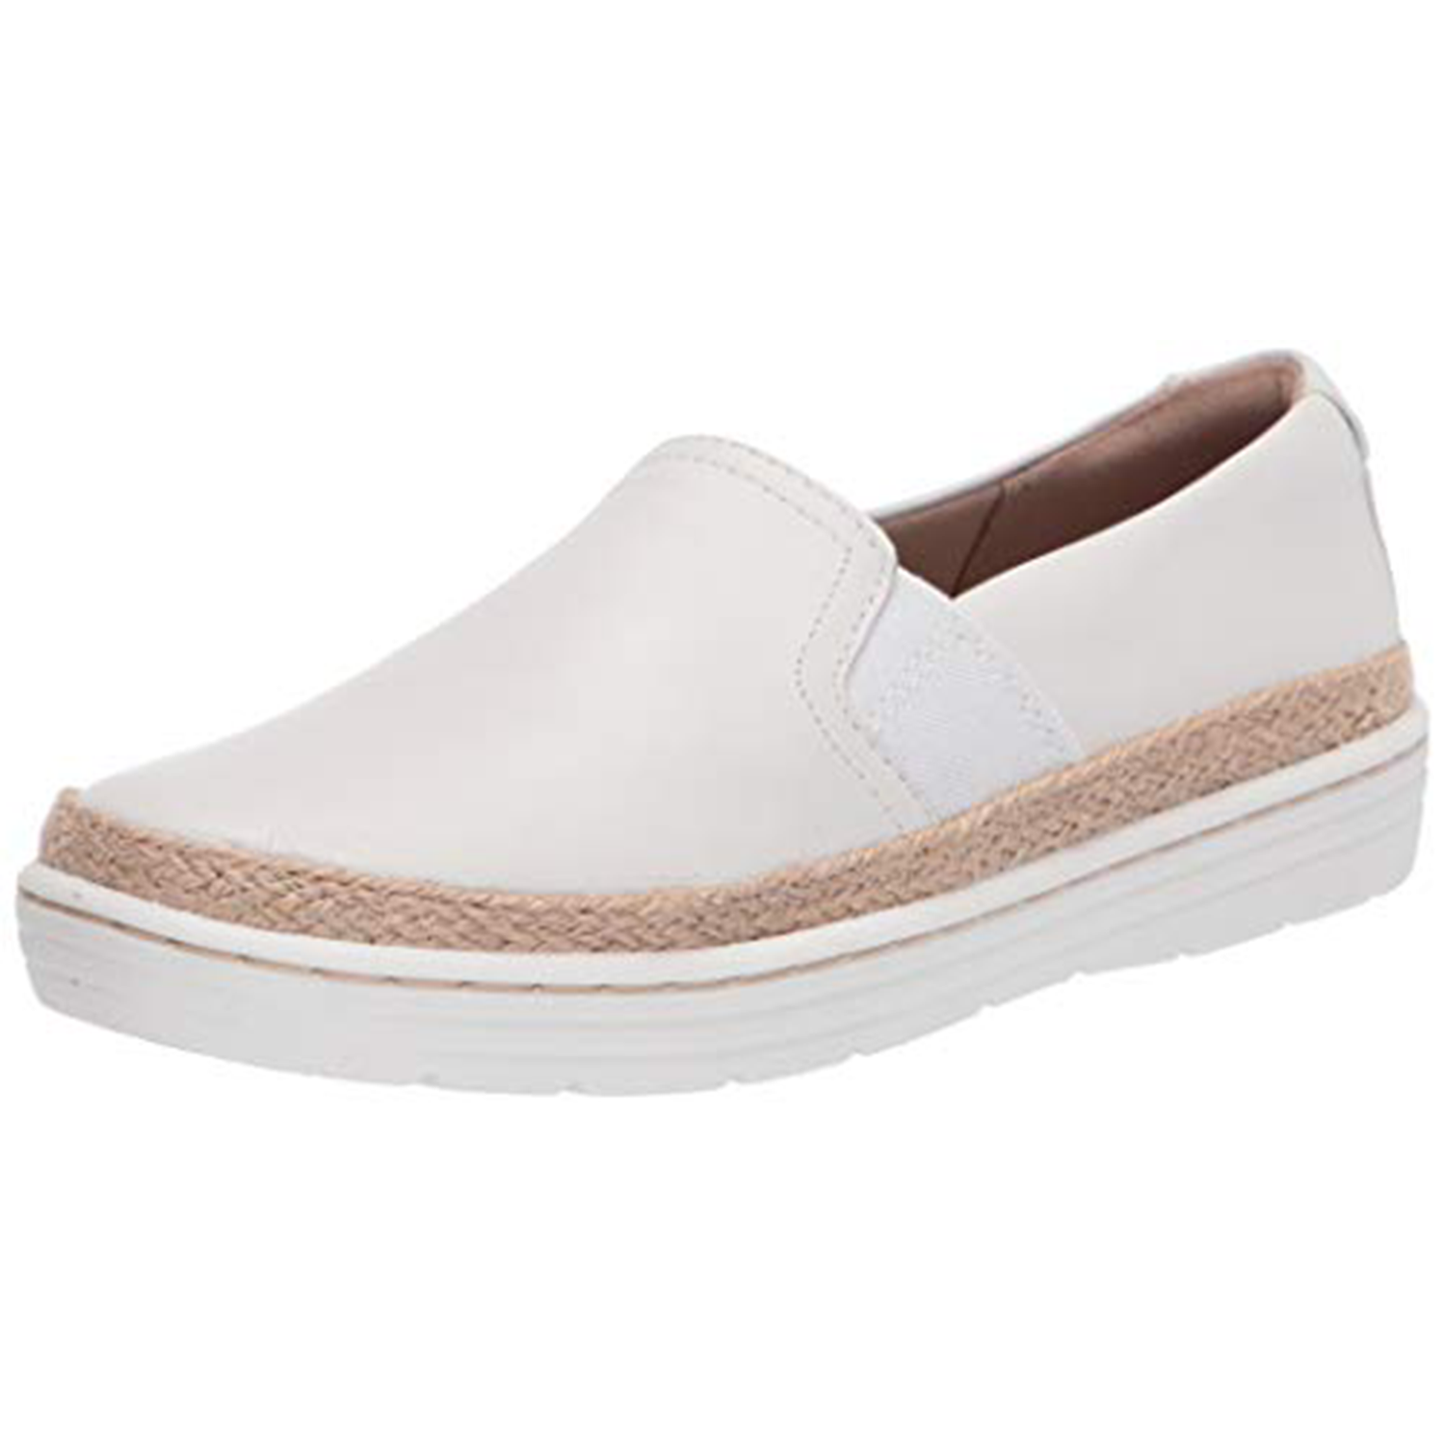 Clarks Women's Marie Sail Loafer Flat, White Leather, 9.5 M US